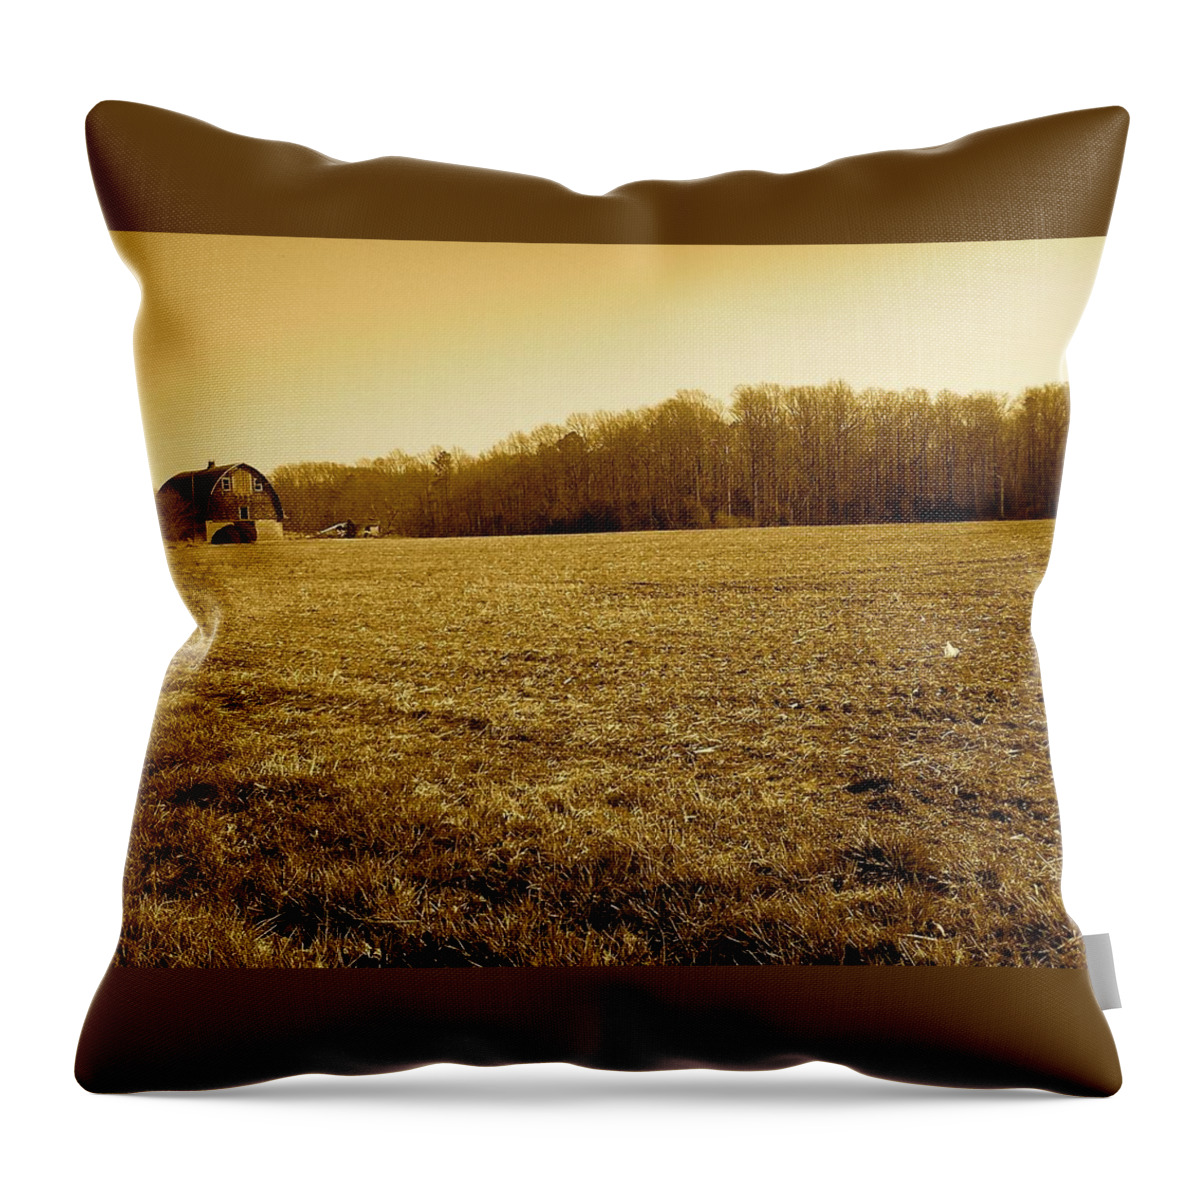 Farm Throw Pillow featuring the photograph Farm Field With Old Barn in Sepia by Chris W Photography AKA Christian Wilson